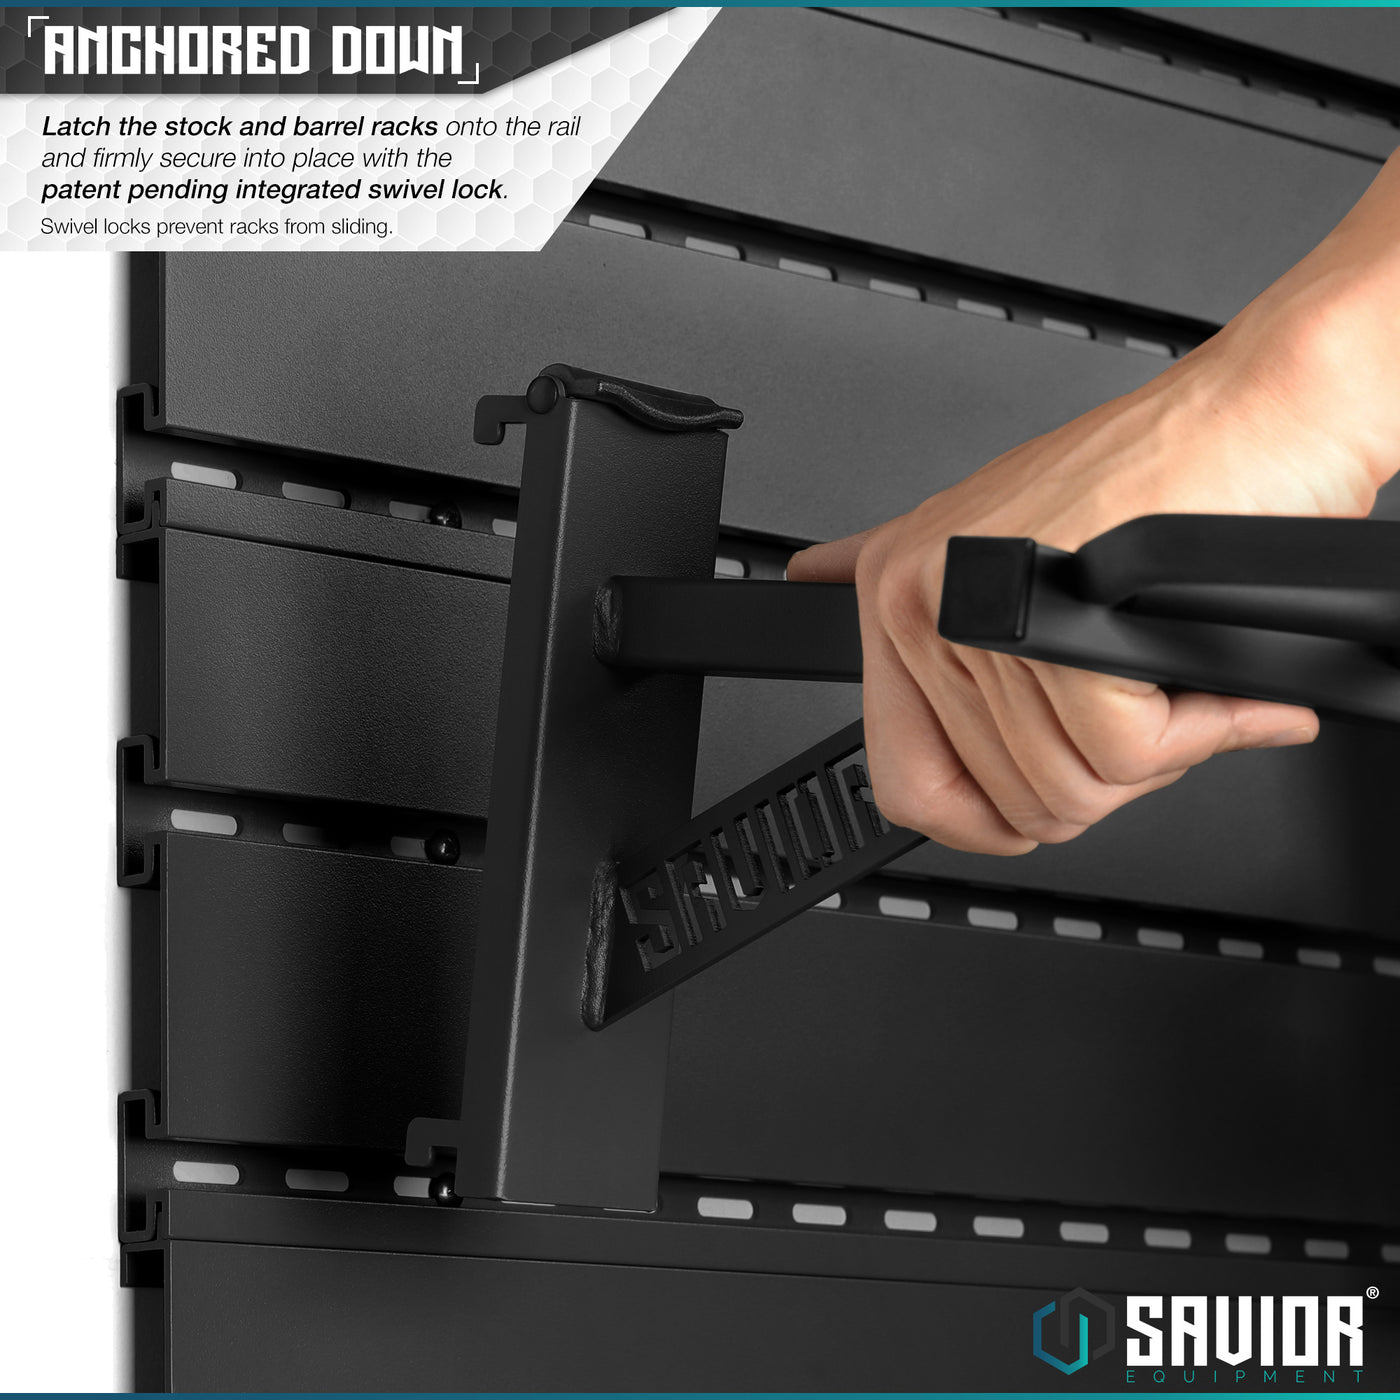 Anchored Down - Latch the stock and barrel rack onto the rail and firmly secure into place with the patent pending integrated swivel lock. Swivel locks prevent racks from sliding.